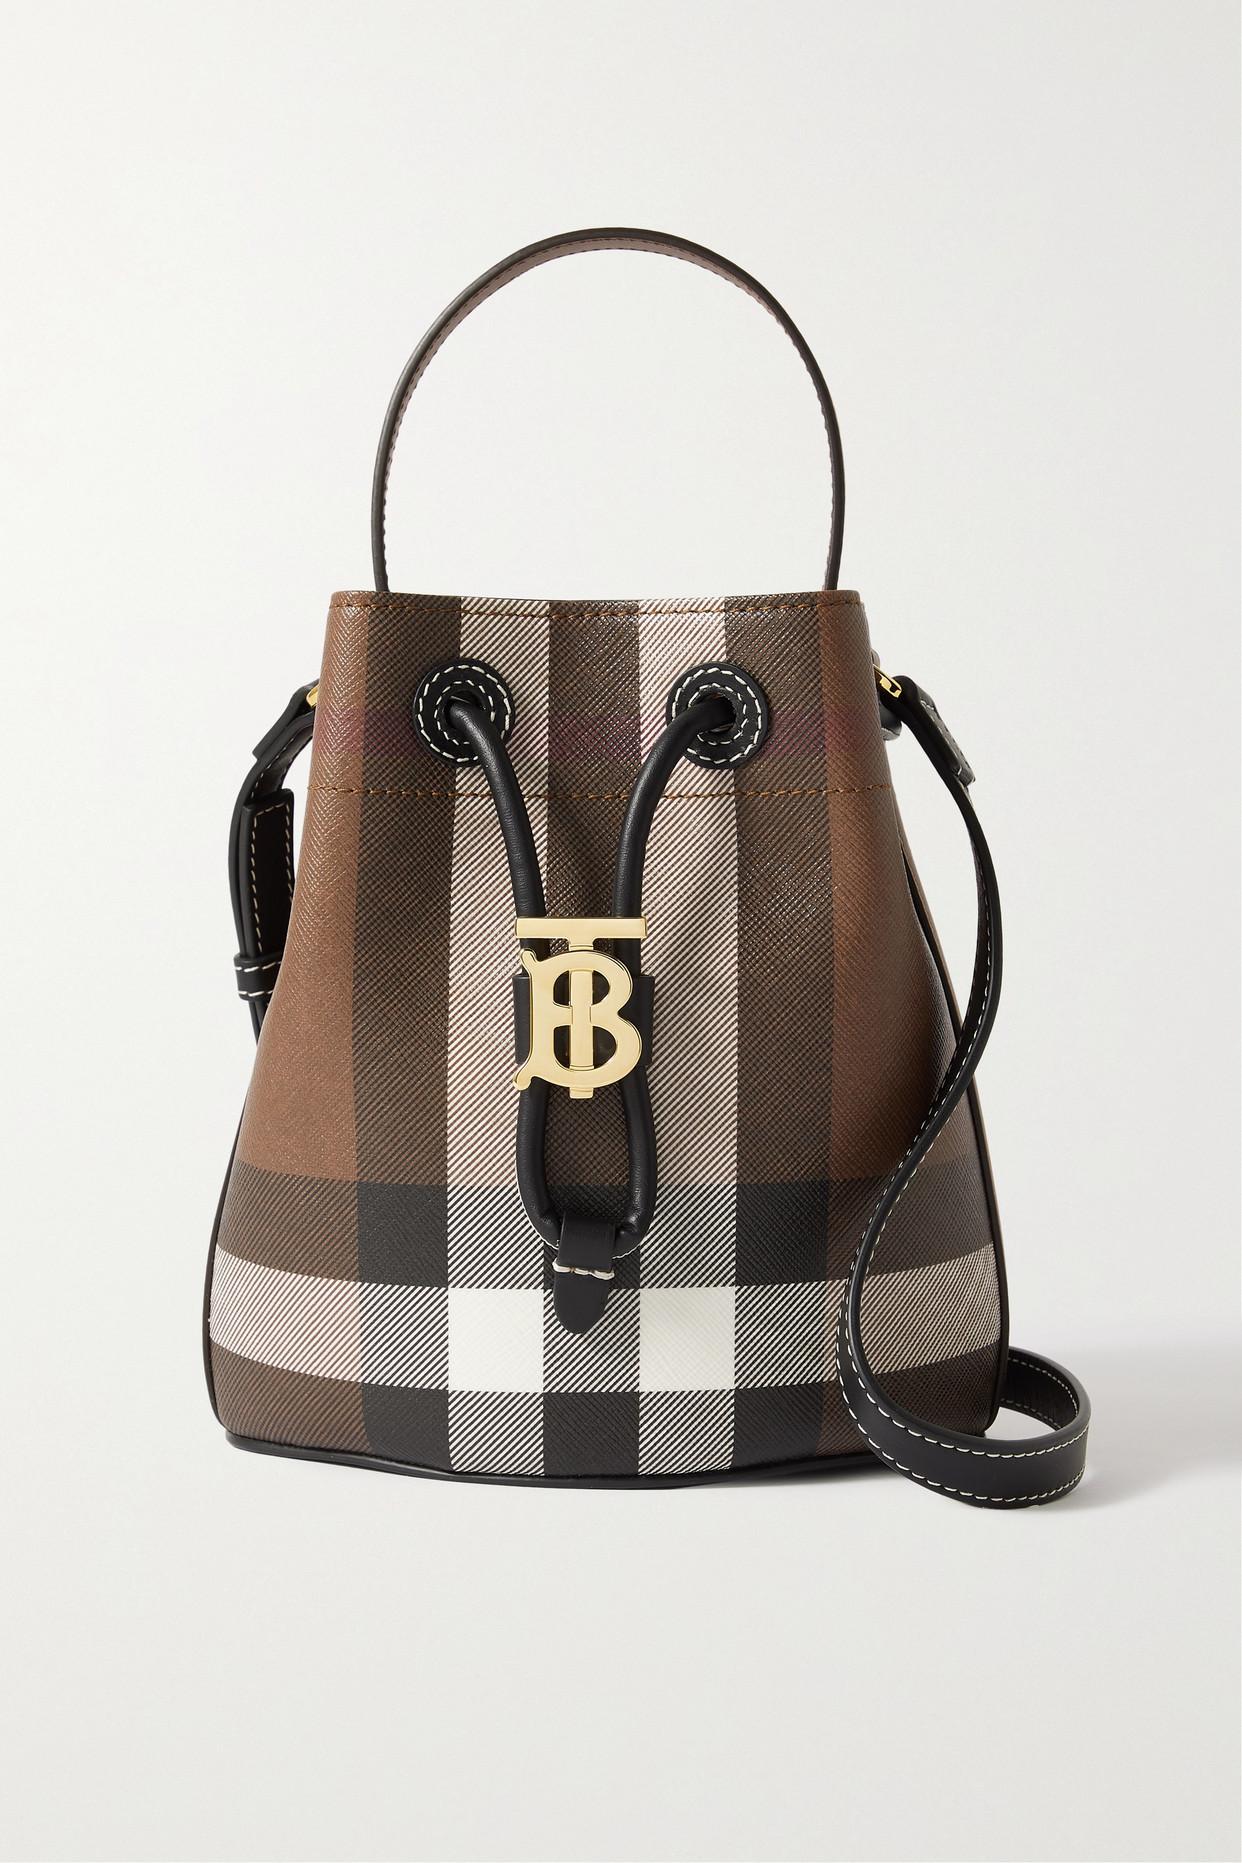 Burberry Leather Trimmed Checked Coated Canvas Bucket Bag In Brown Lyst